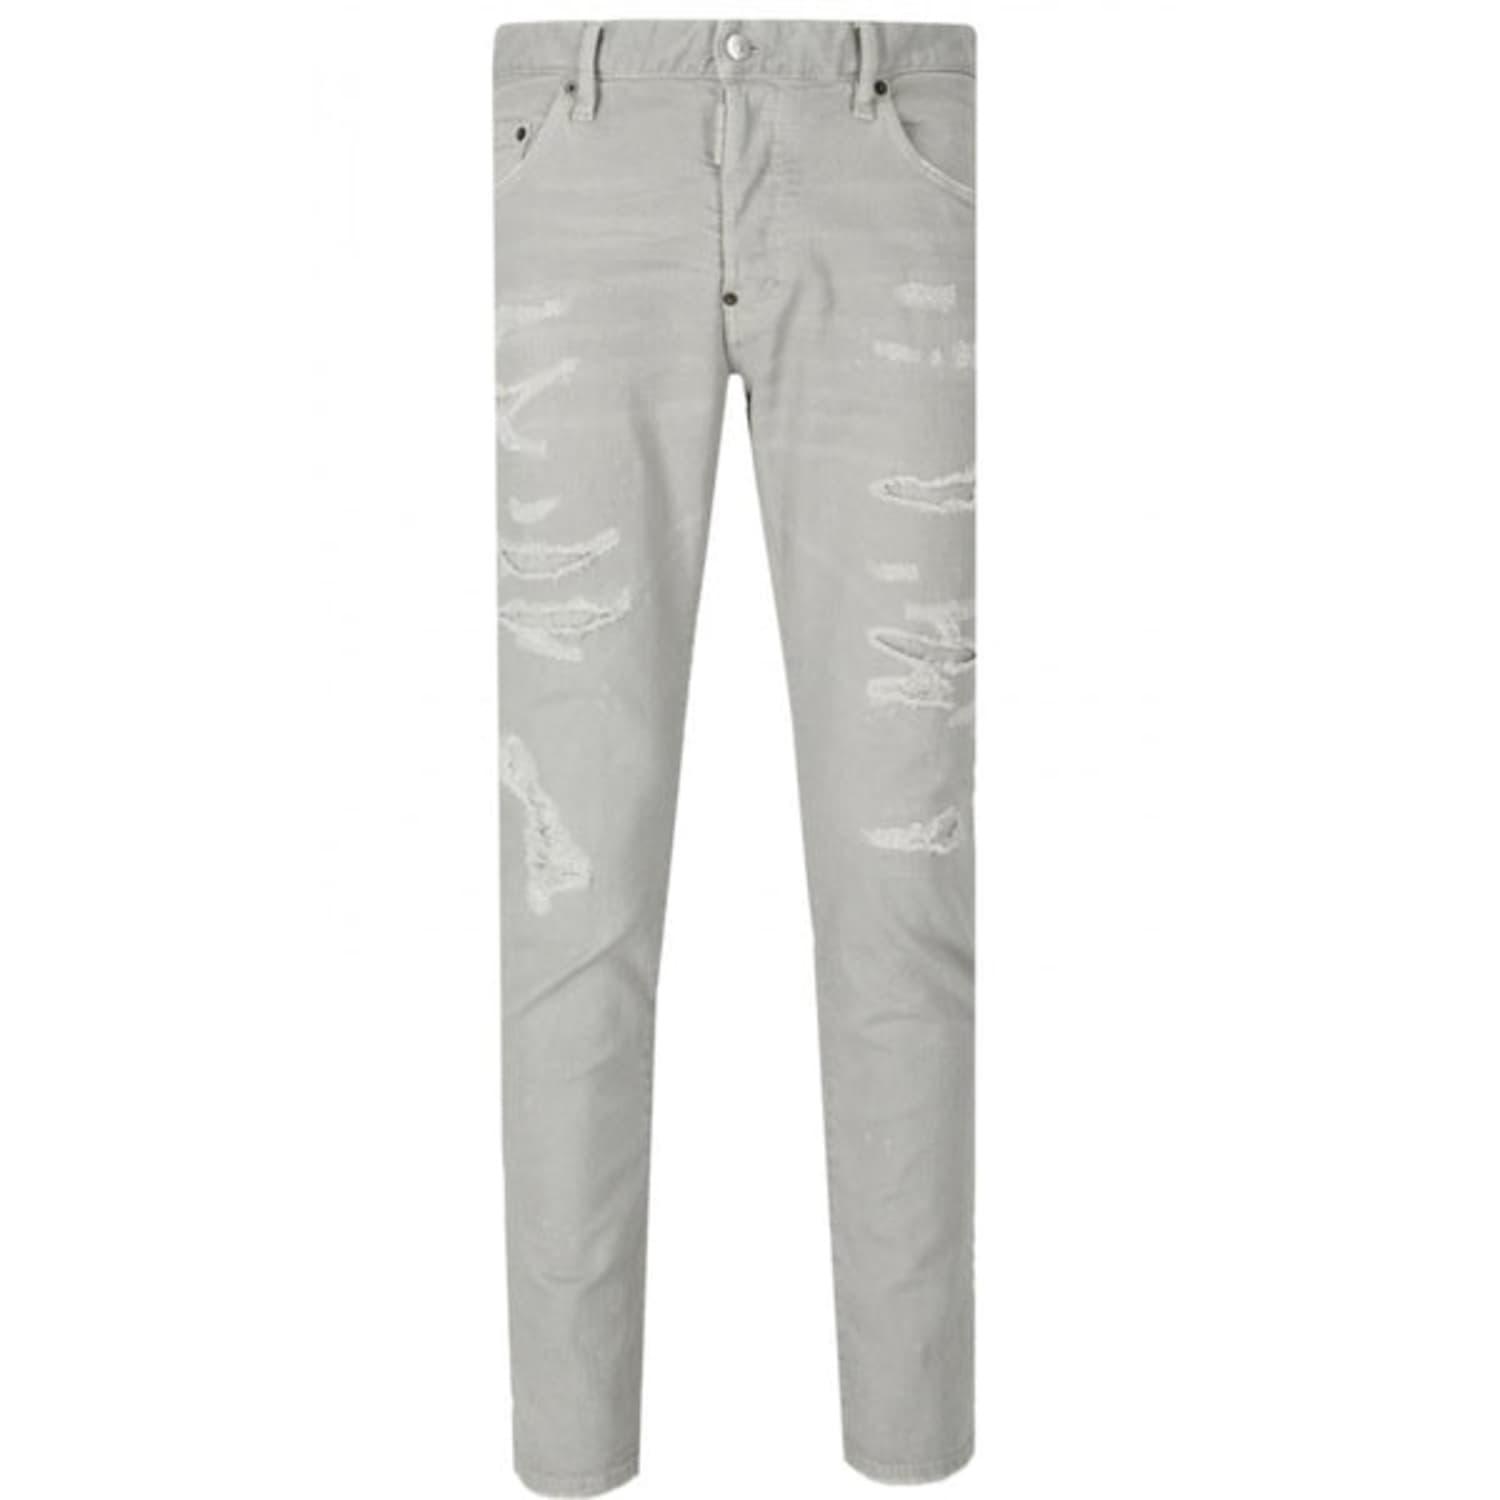 DSquared² Distressed Skater Jeans Grey in Gray | Lyst